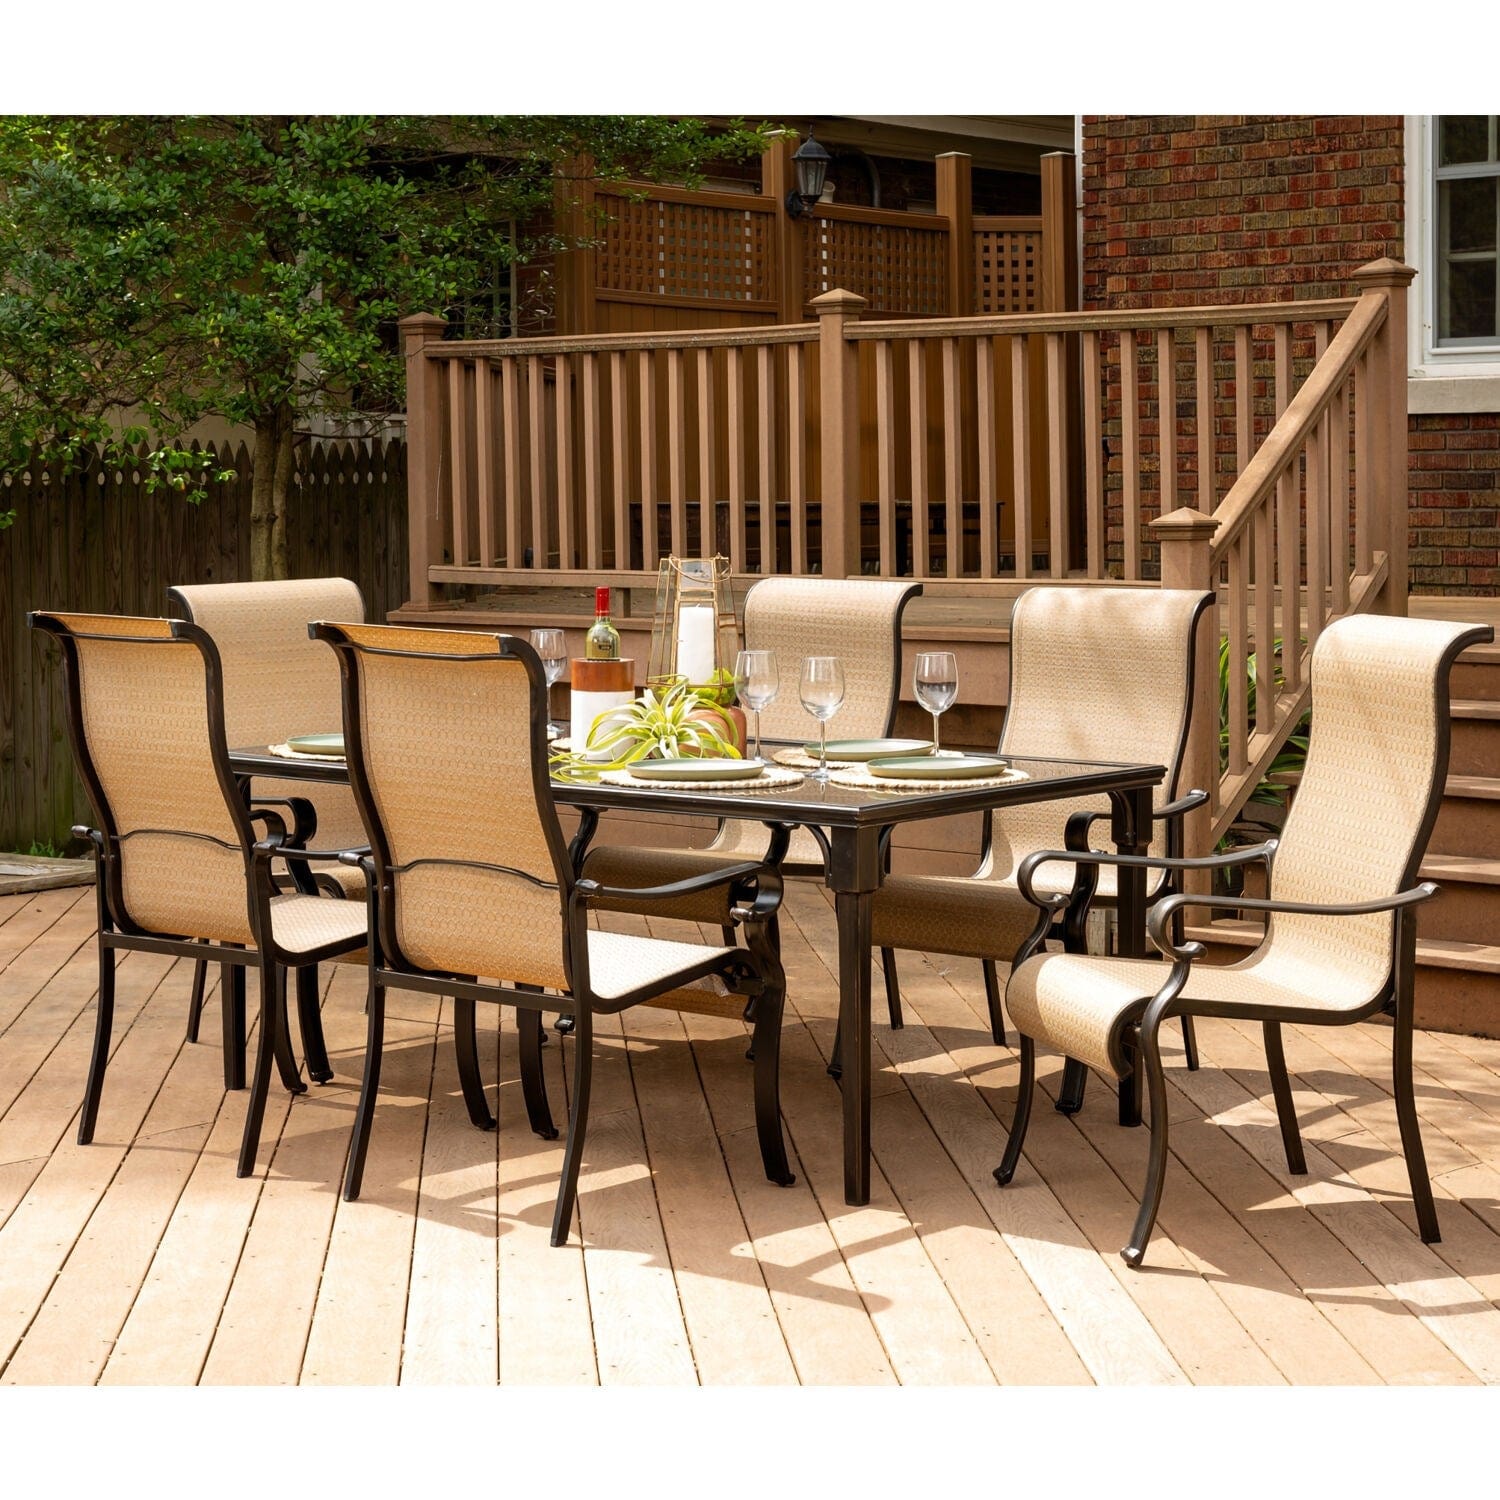 Hanover Outdoor Dining Set Hanover Brigantine 7 Piece Outdoor Dining Set with Glass-Top Table | 6 Sling Chairs | Tan/Cast Aluminum - BRIGDN7PC-GLS